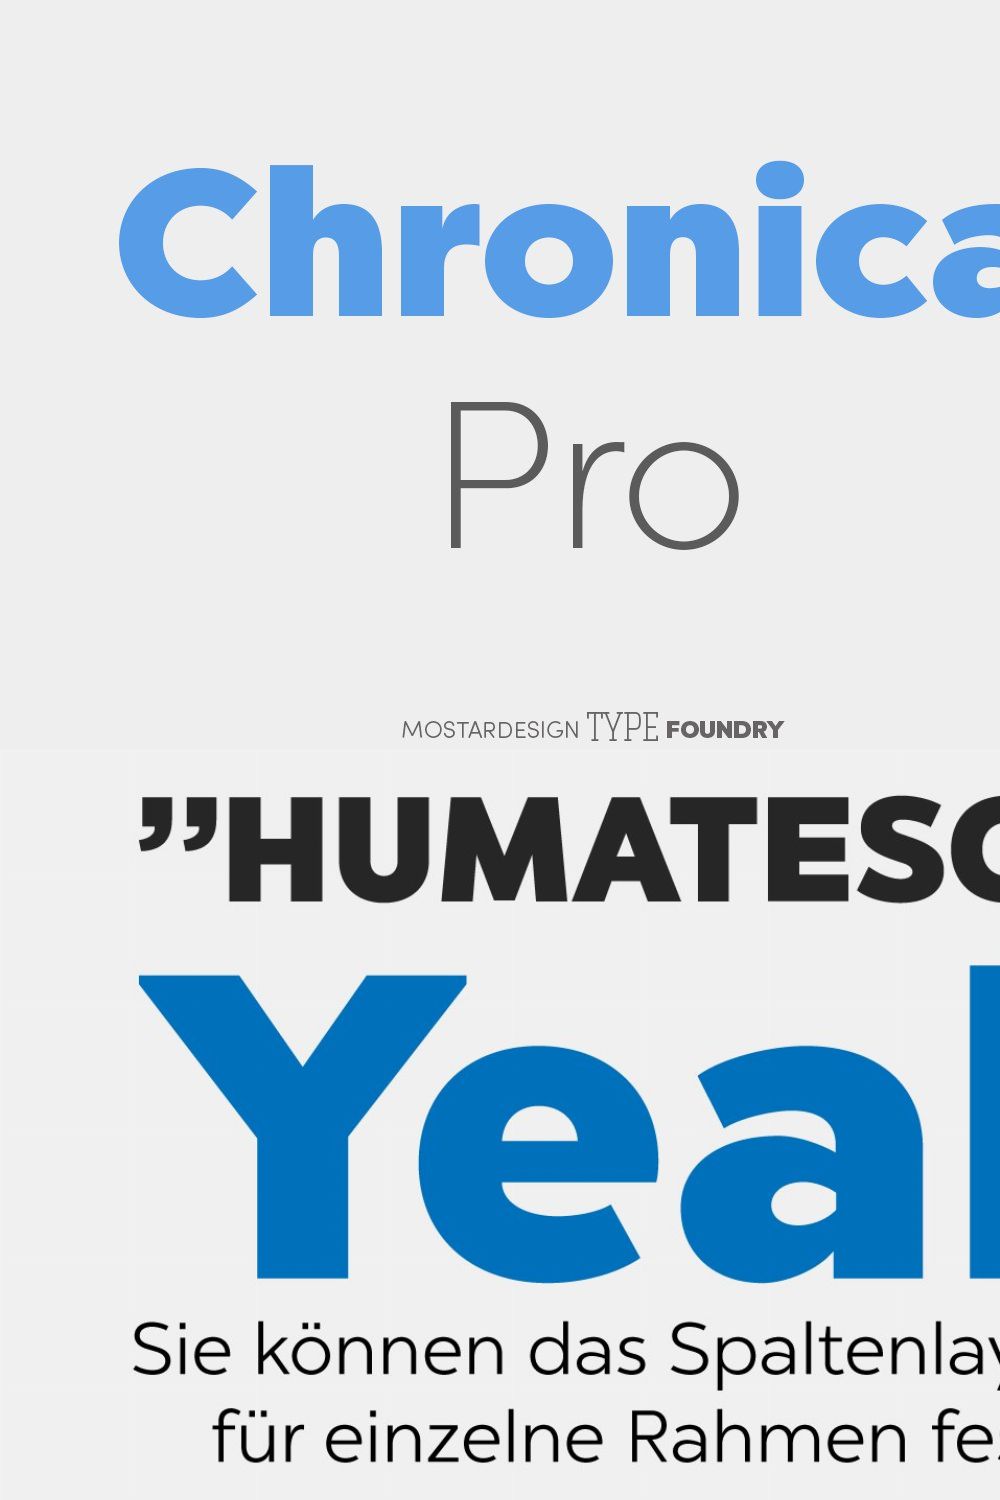 Chronica Pro Family (18 fonts) pinterest preview image.